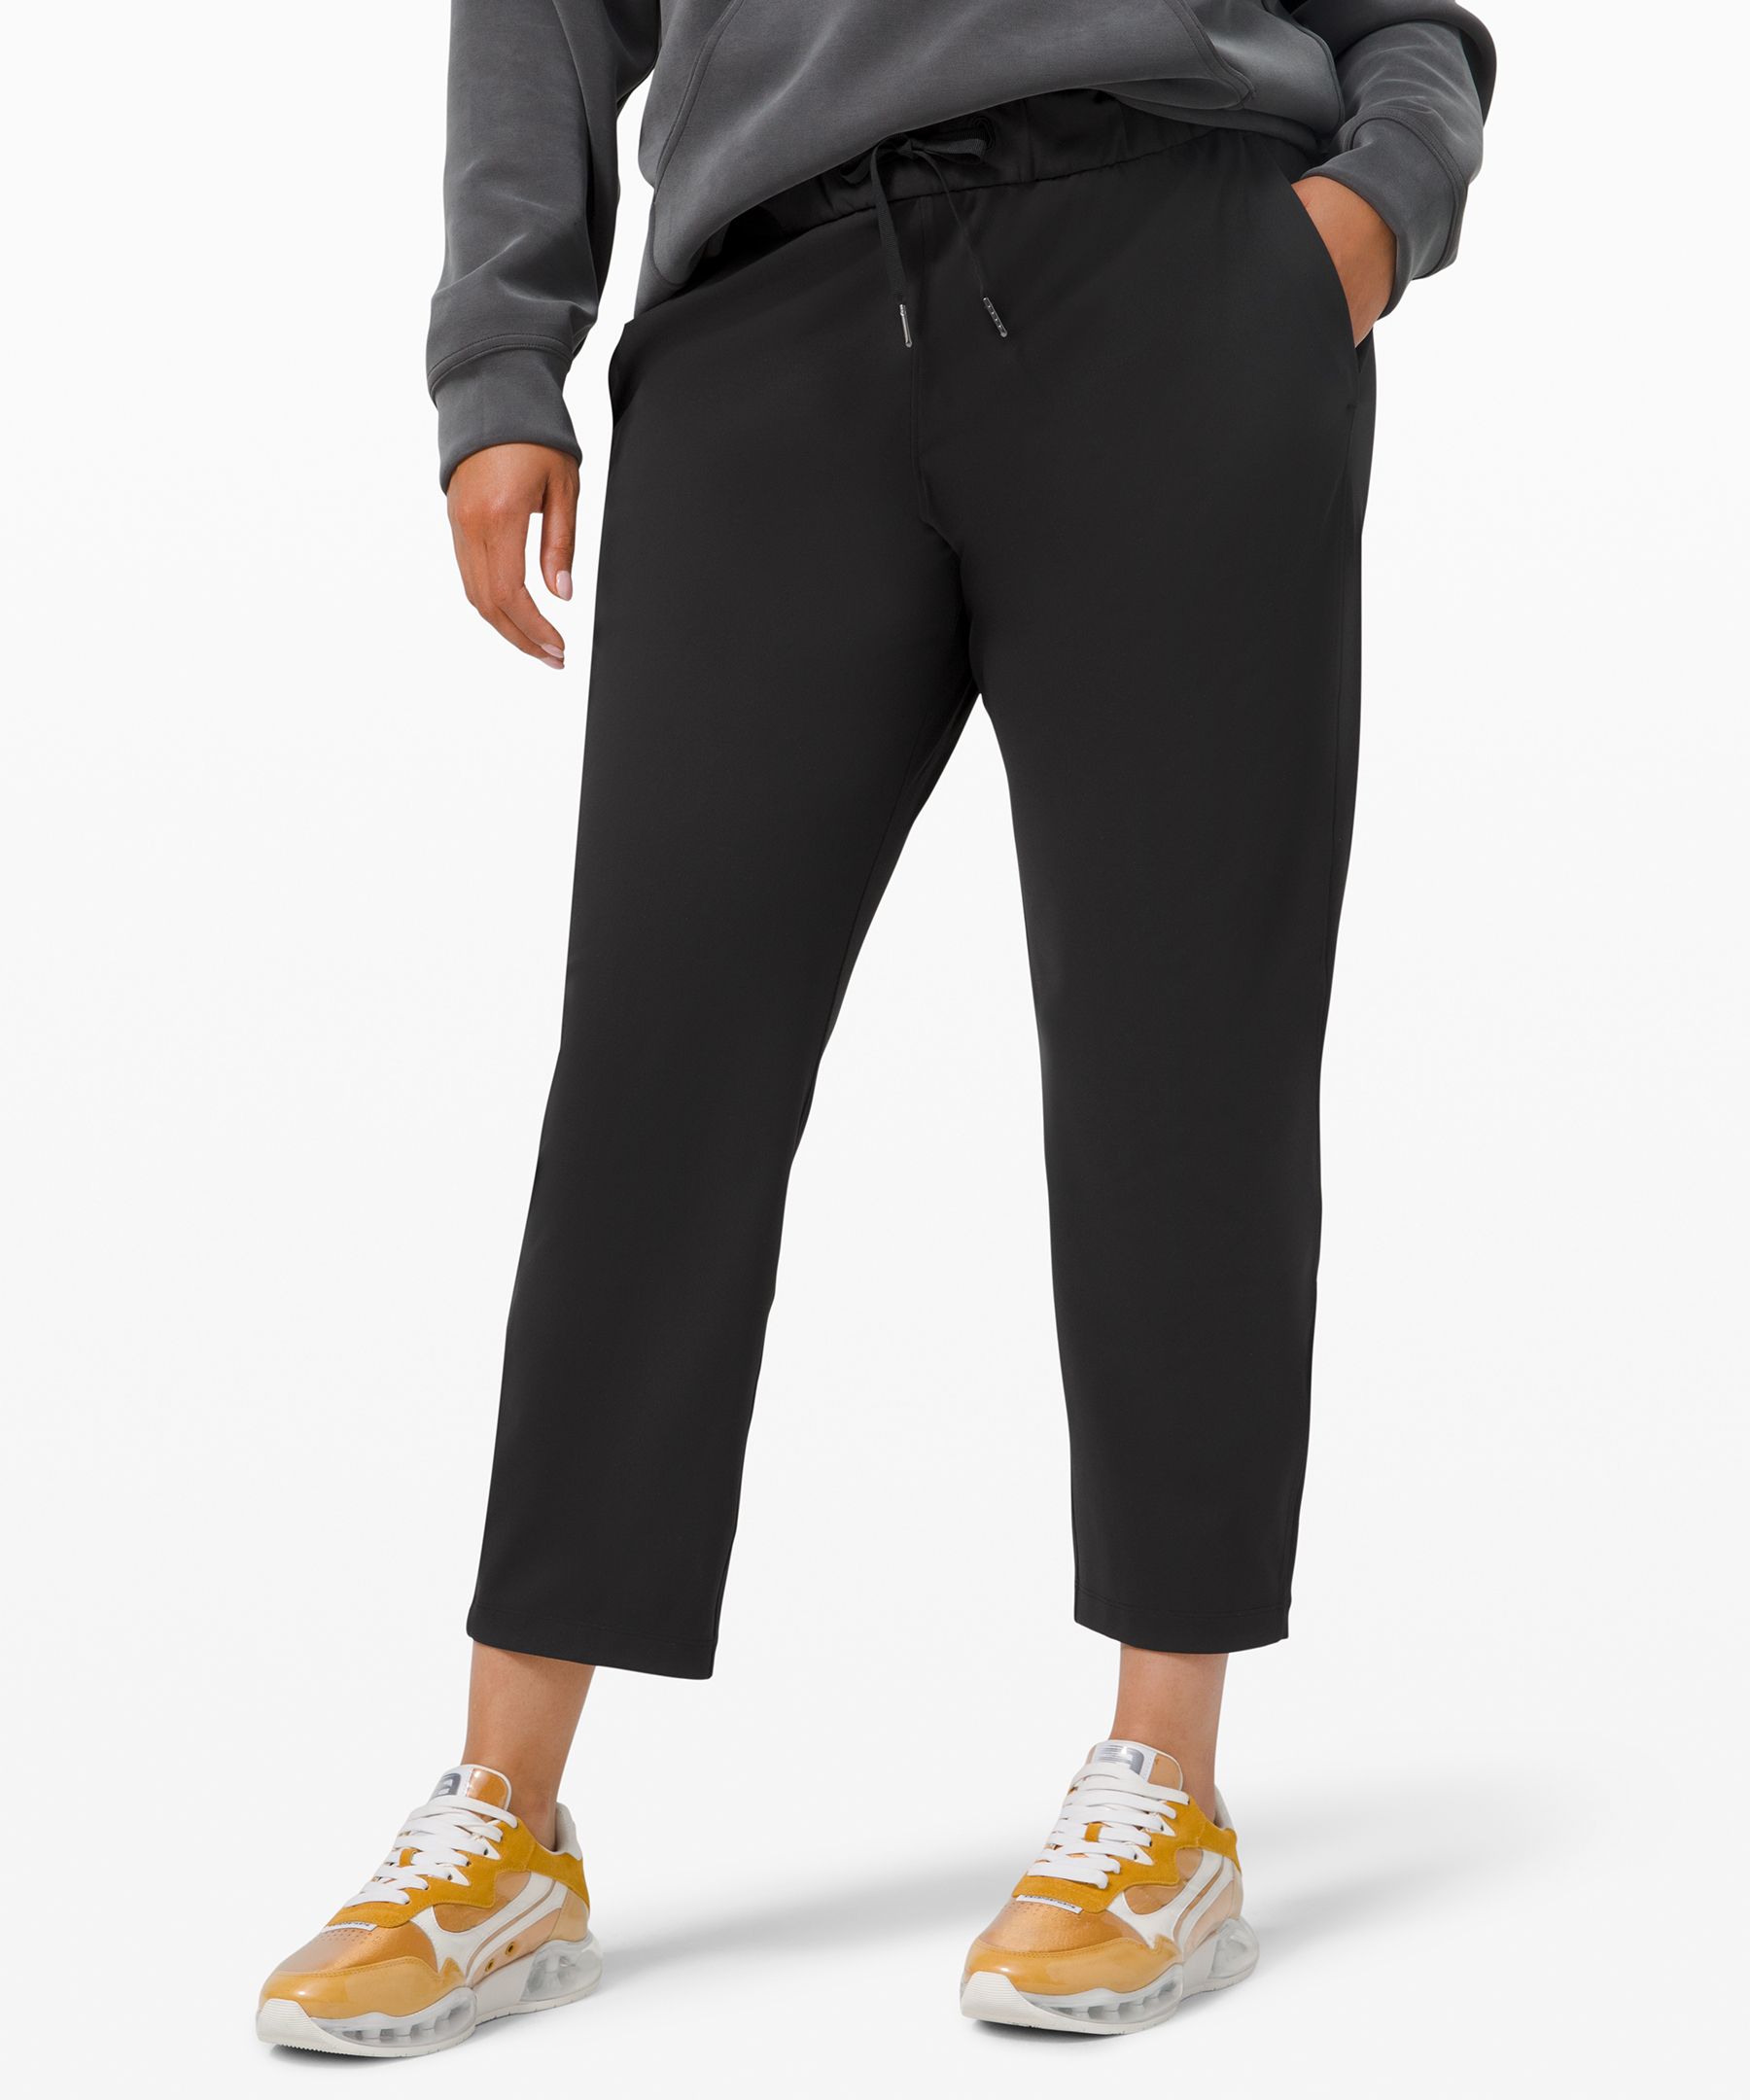 lululemon on the fly pant knock off